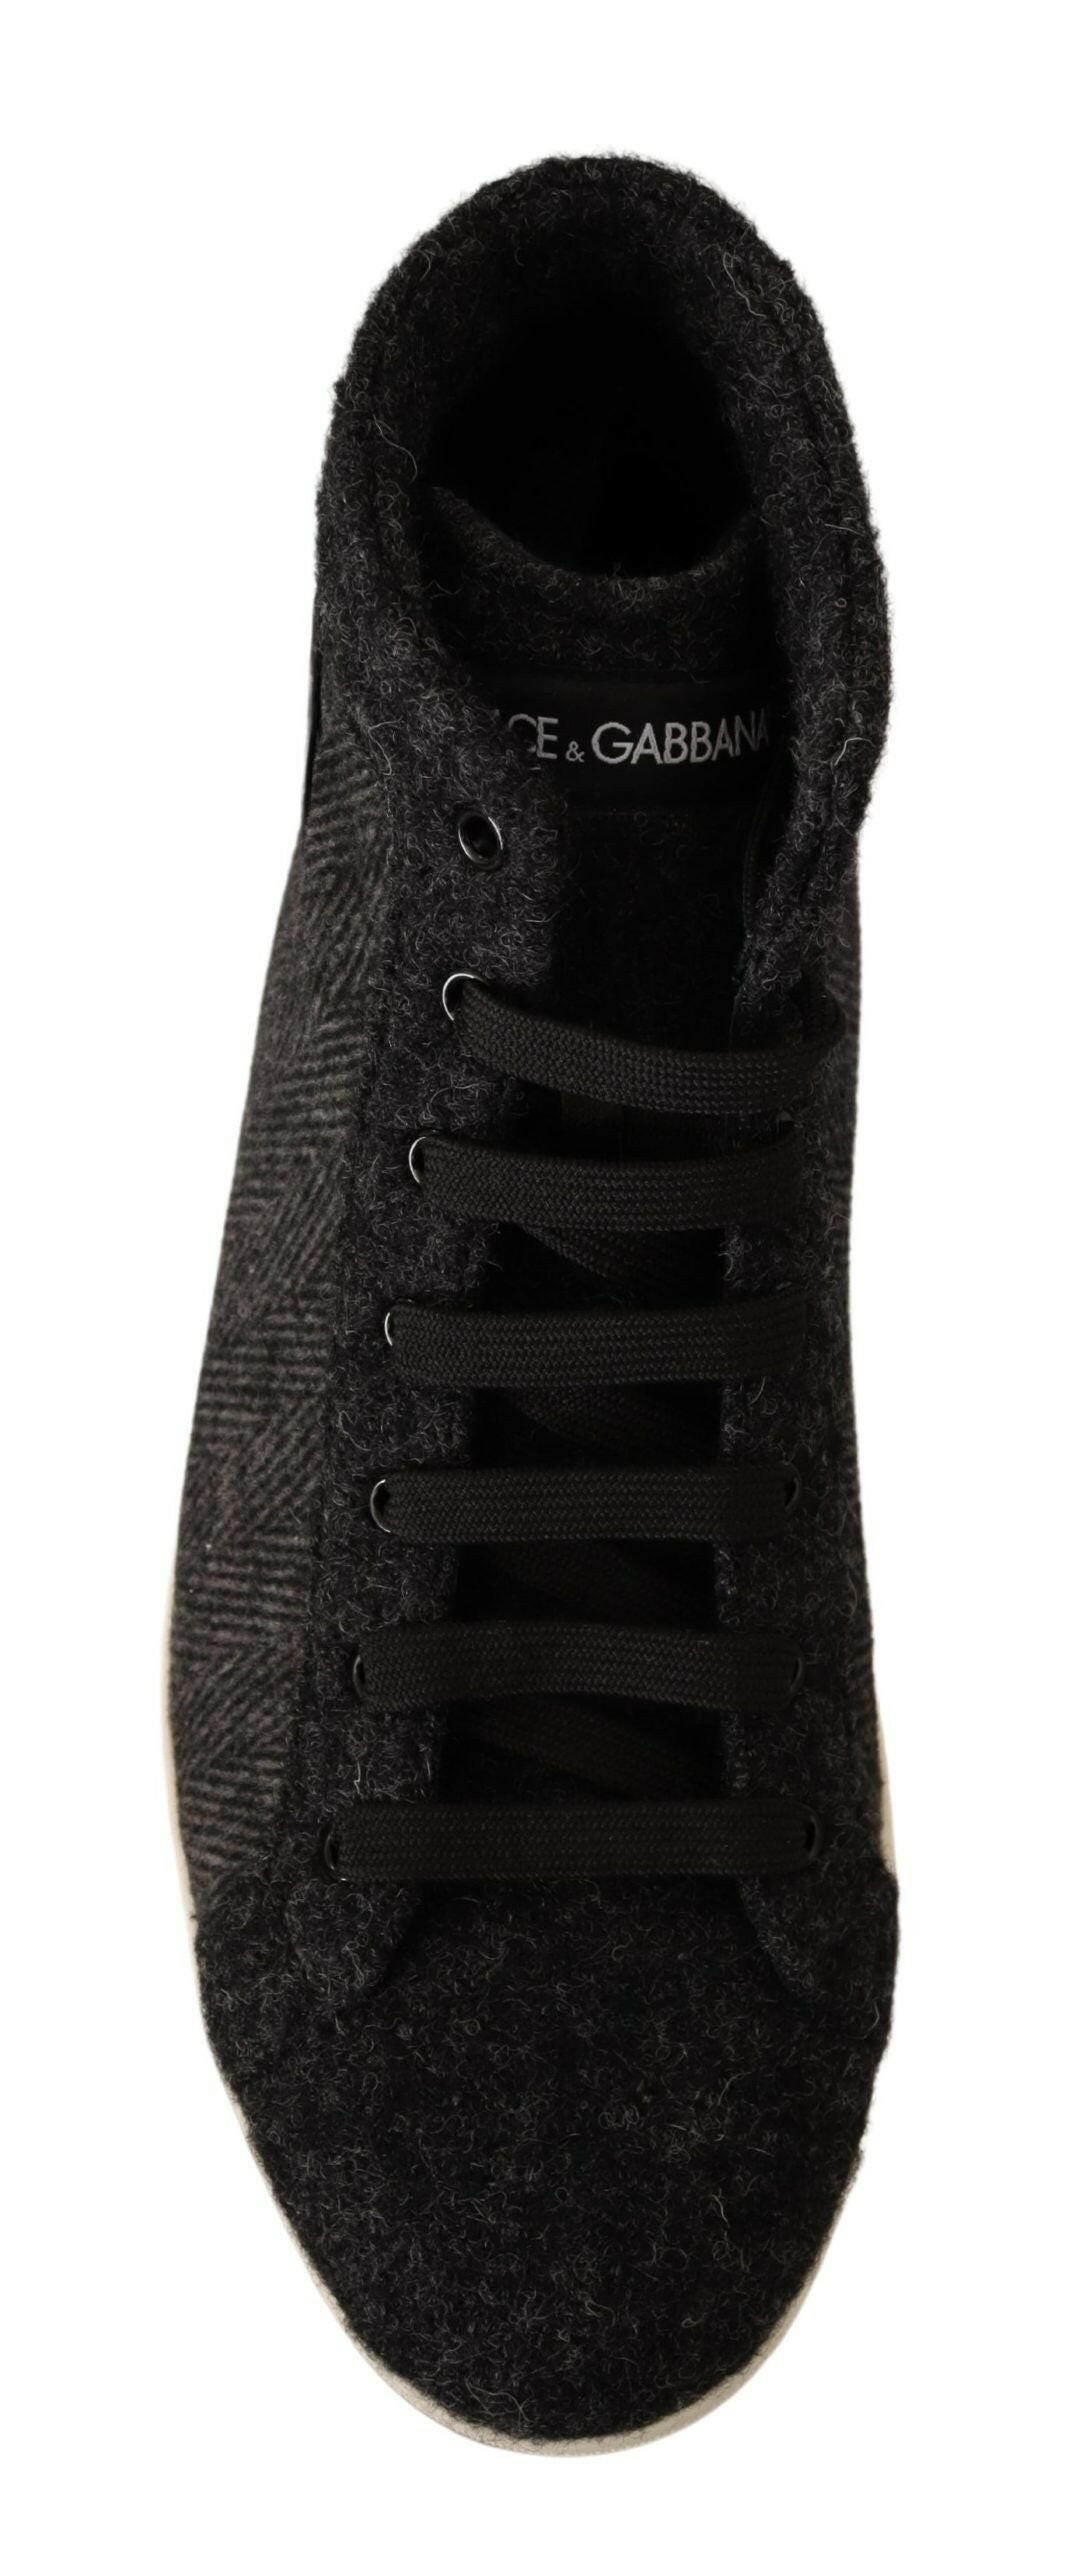 Dolce & Gabbana Gray Wool Cotton Casual High Top Sneakers - GENUINE AUTHENTIC BRAND LLC  